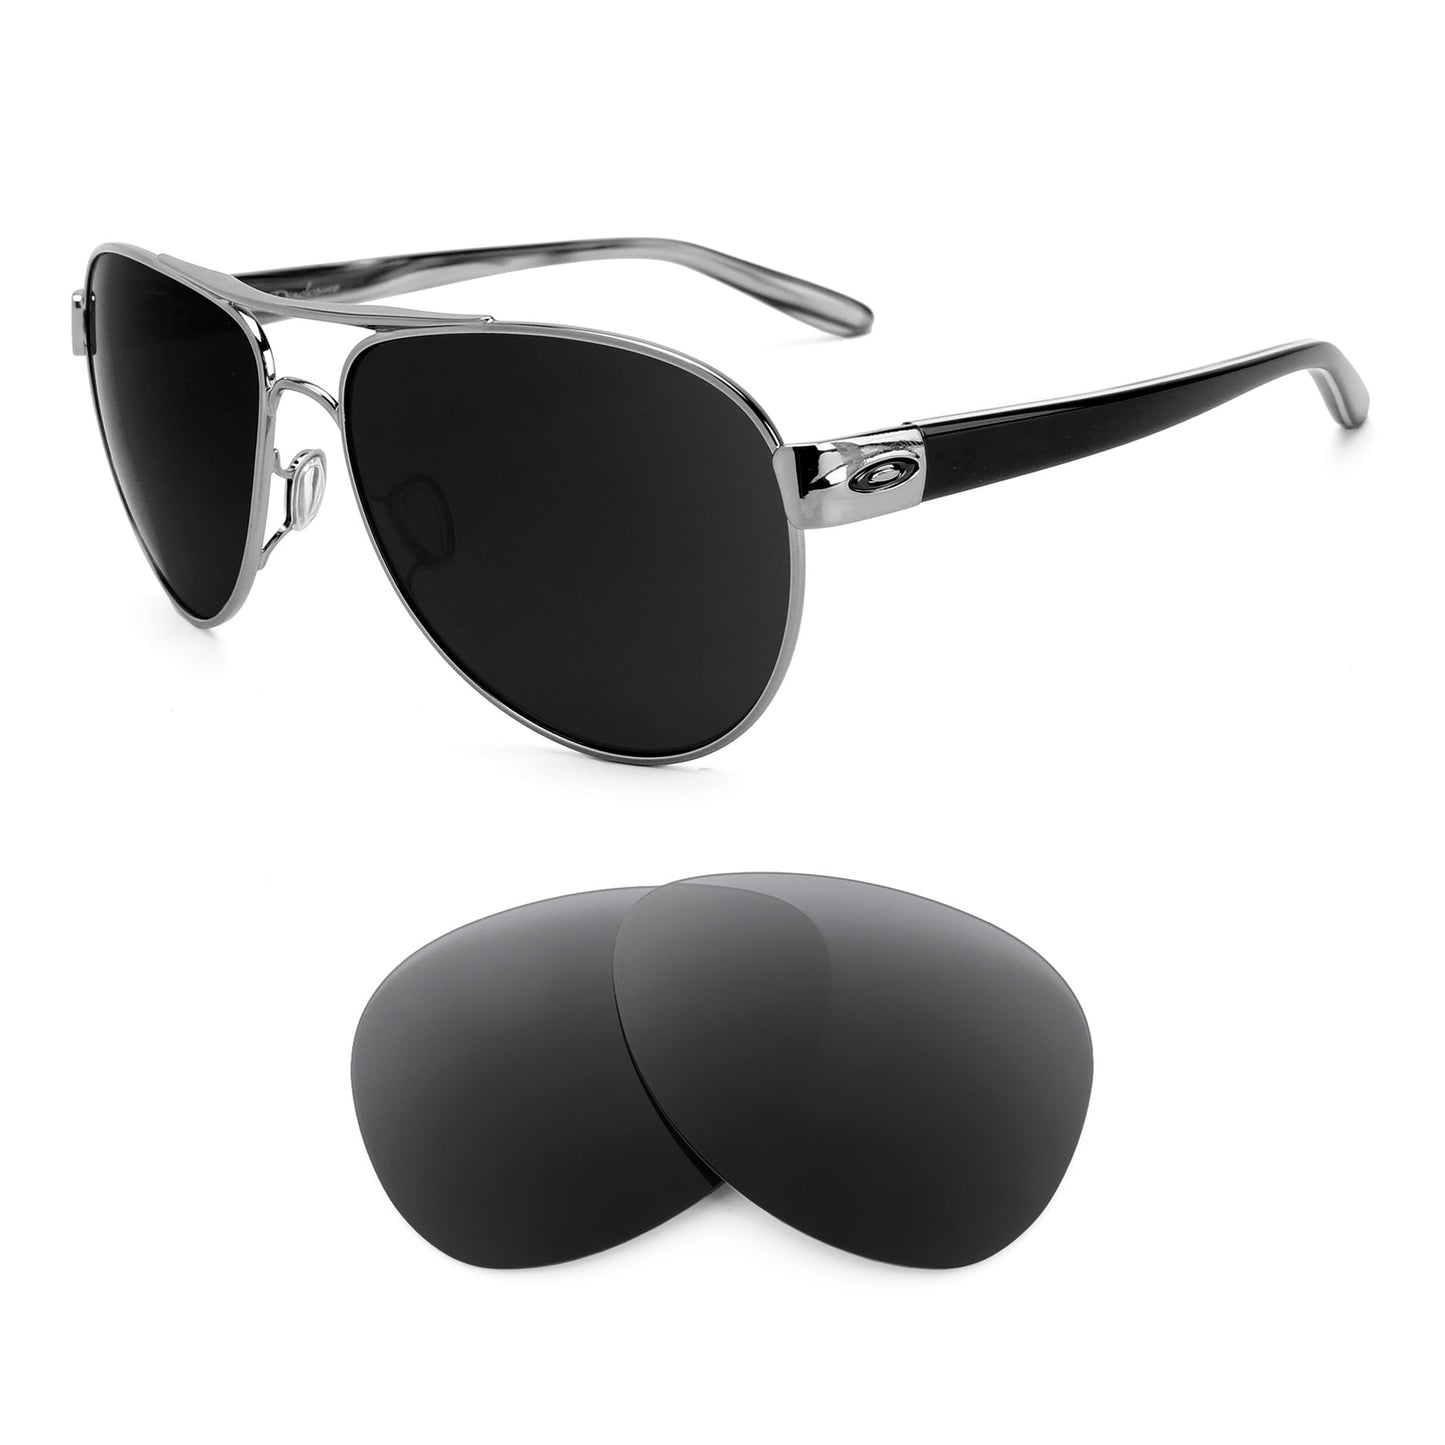 Oakley Disclosure sunglasses with replacement lenses